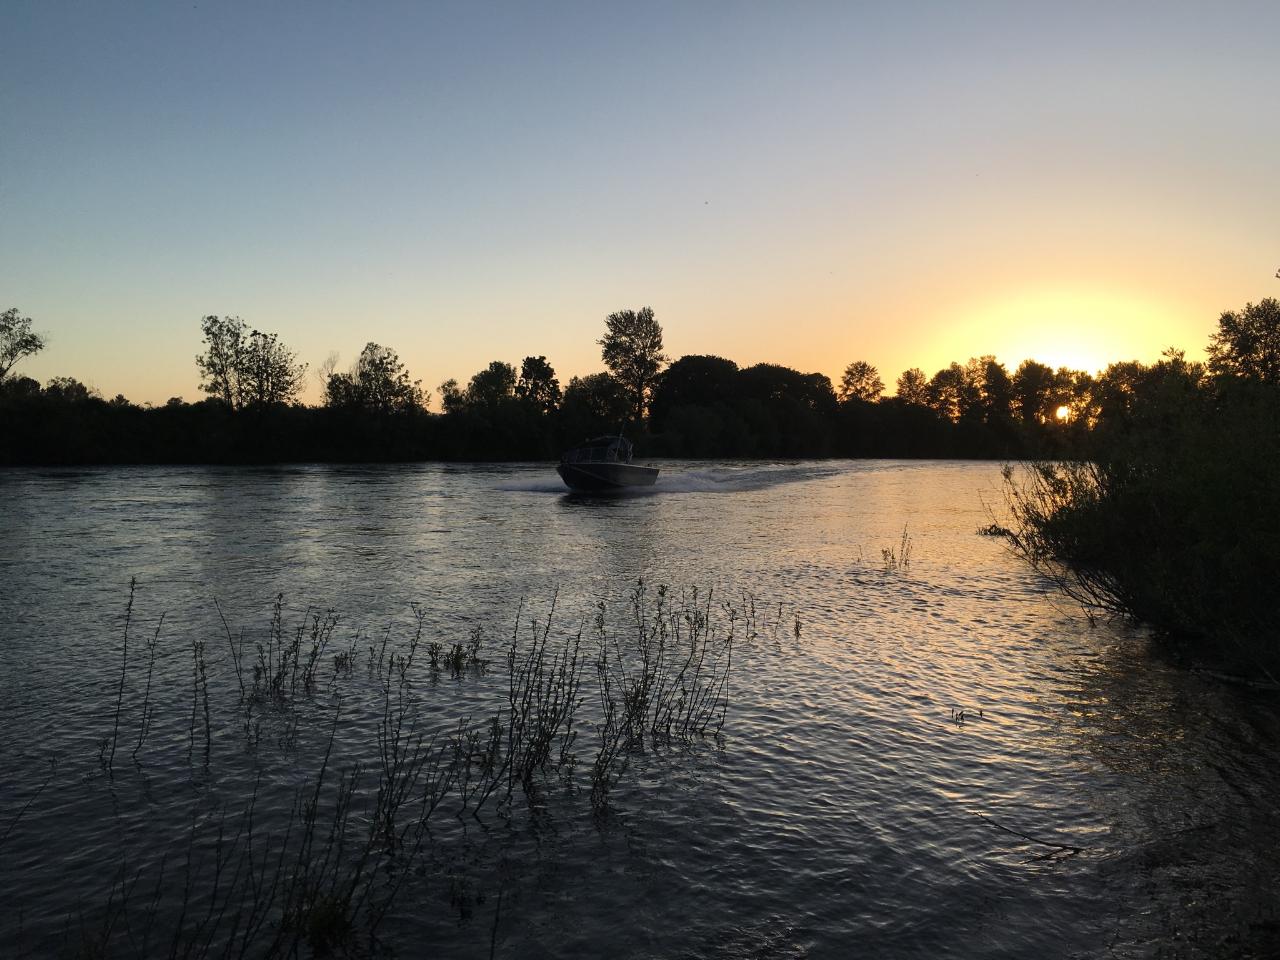 A sunset falls behind a jetboat driving on a river